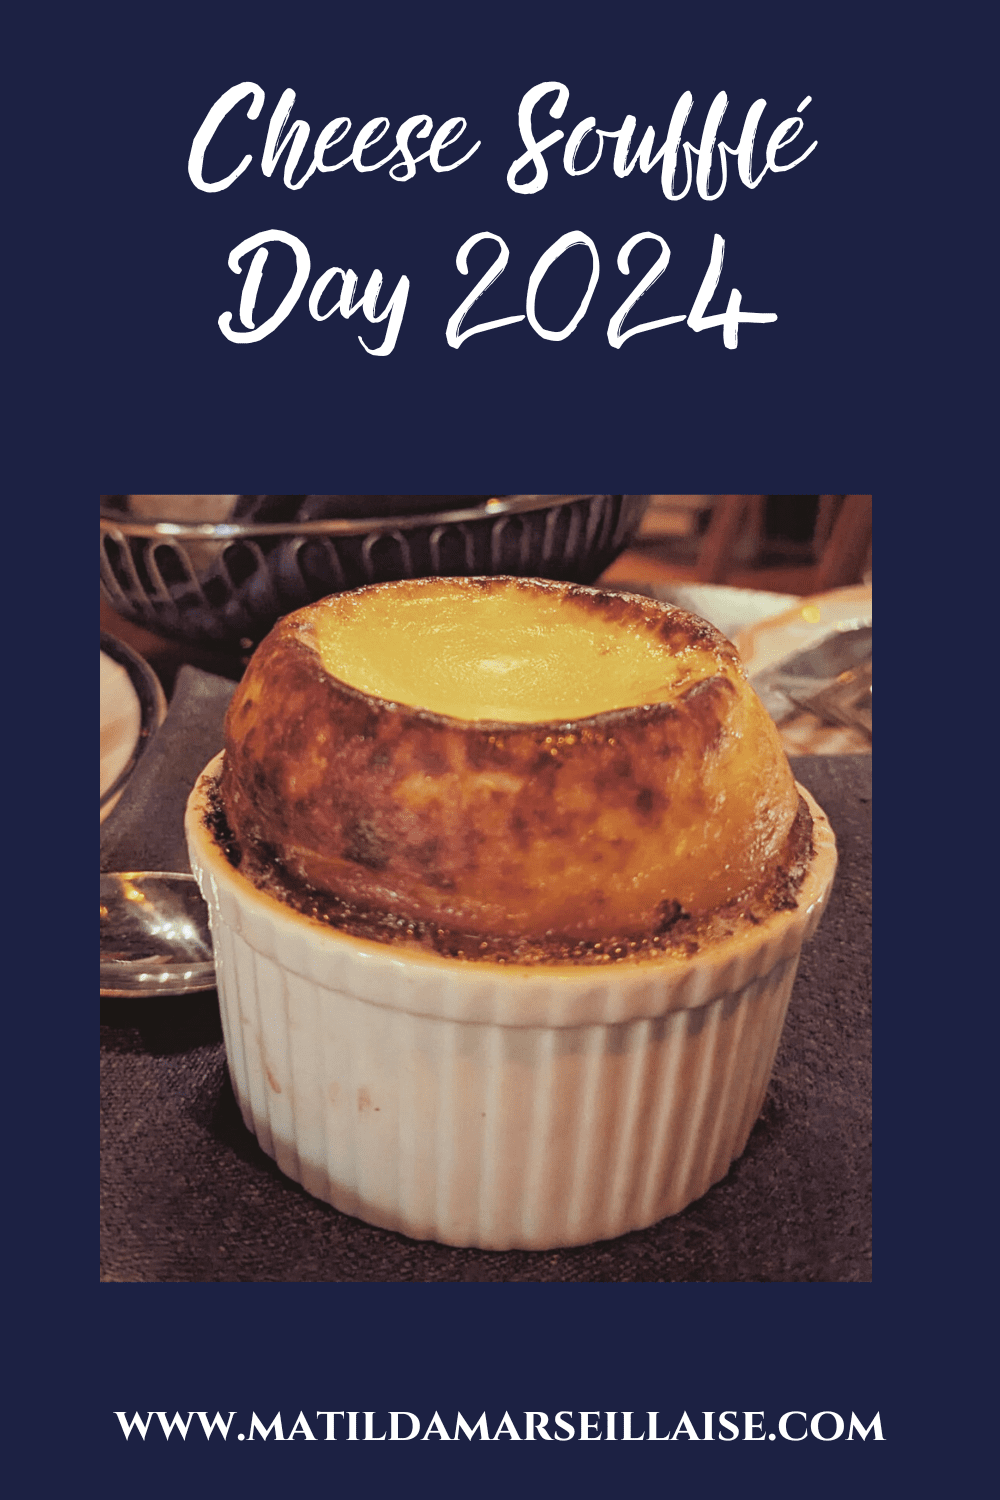 Cheese Soufflé Day 2024